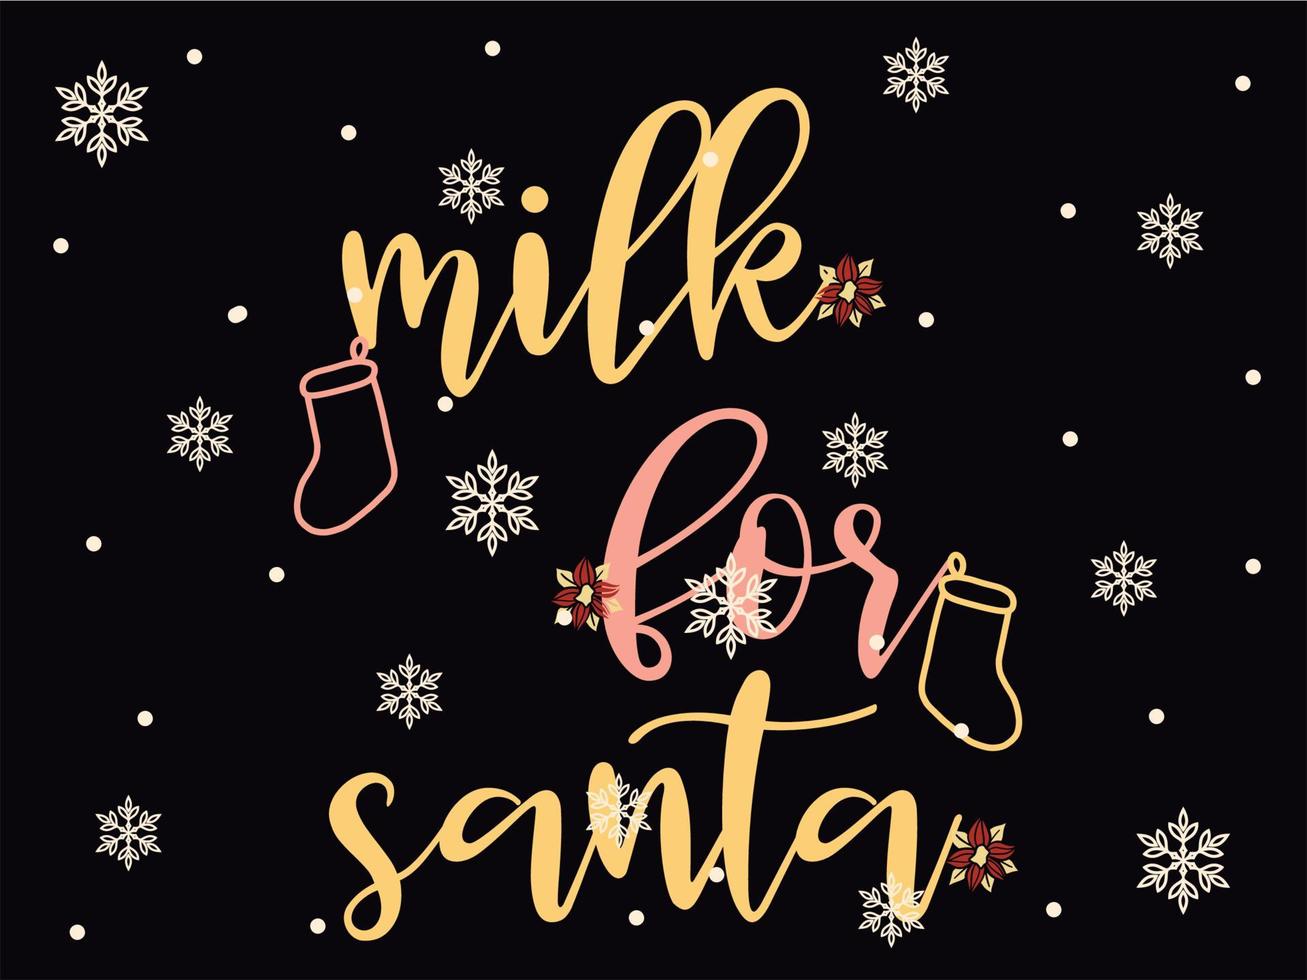 Milk for Santa 05 Merry Christmas and Happy Holidays Typography set vector